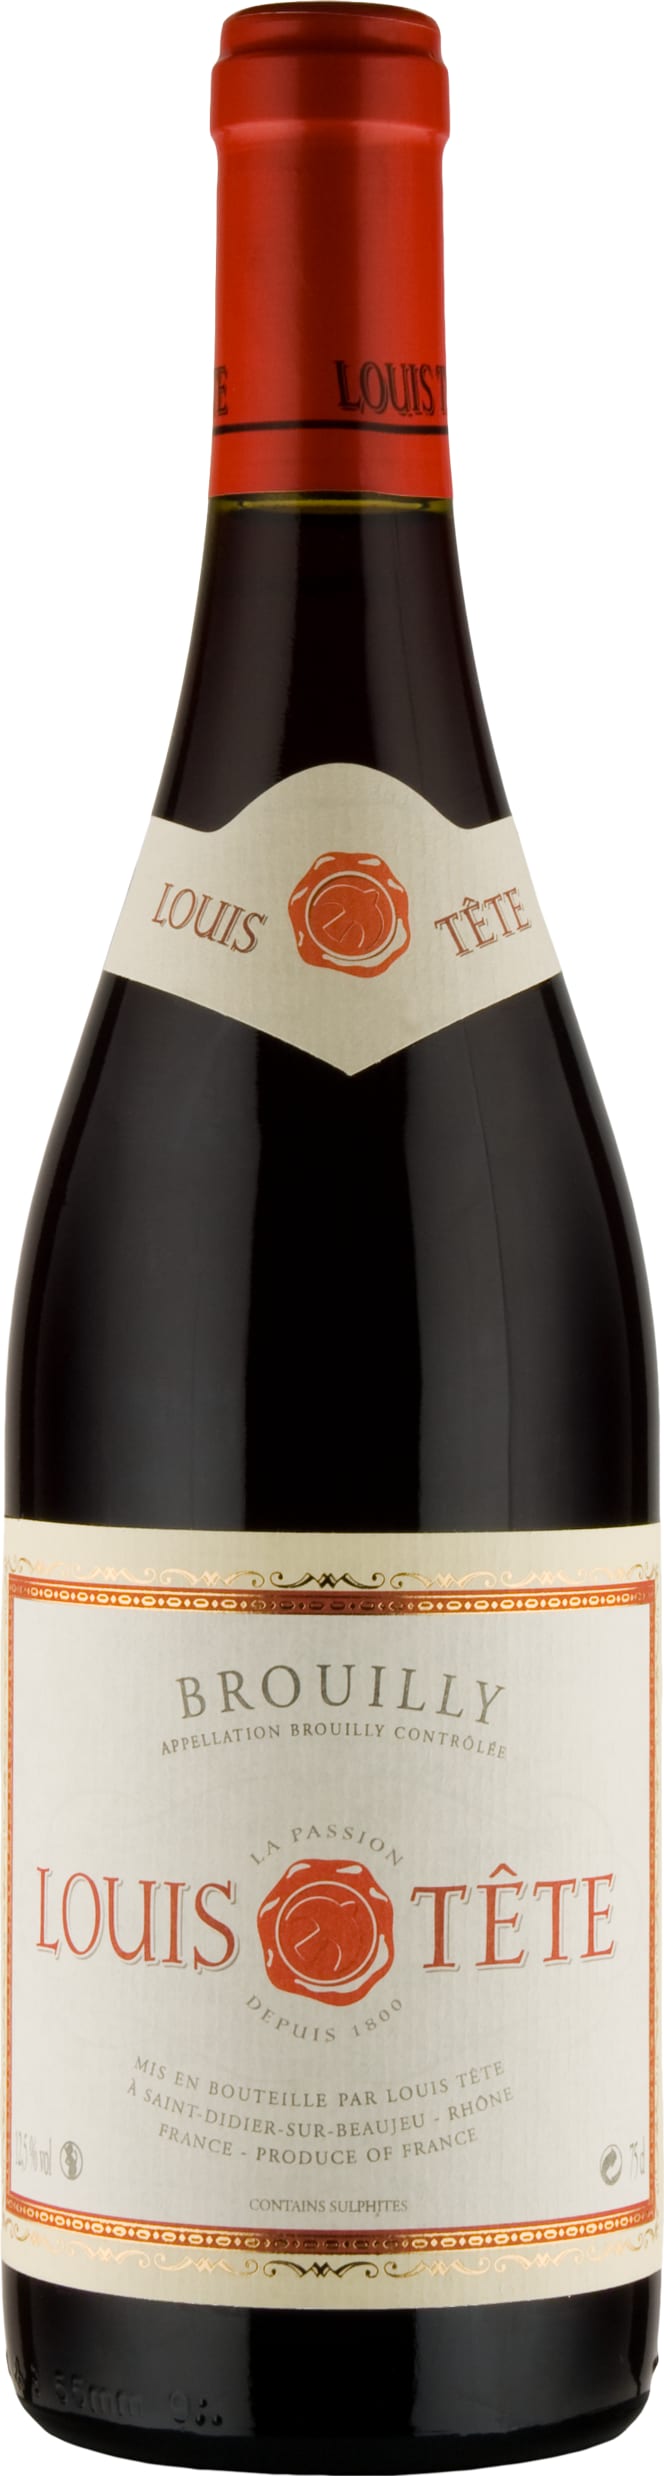 Louis Tete Brouilly 2022 75cl - Buy Louis Tete Wines from GREAT WINES DIRECT wine shop